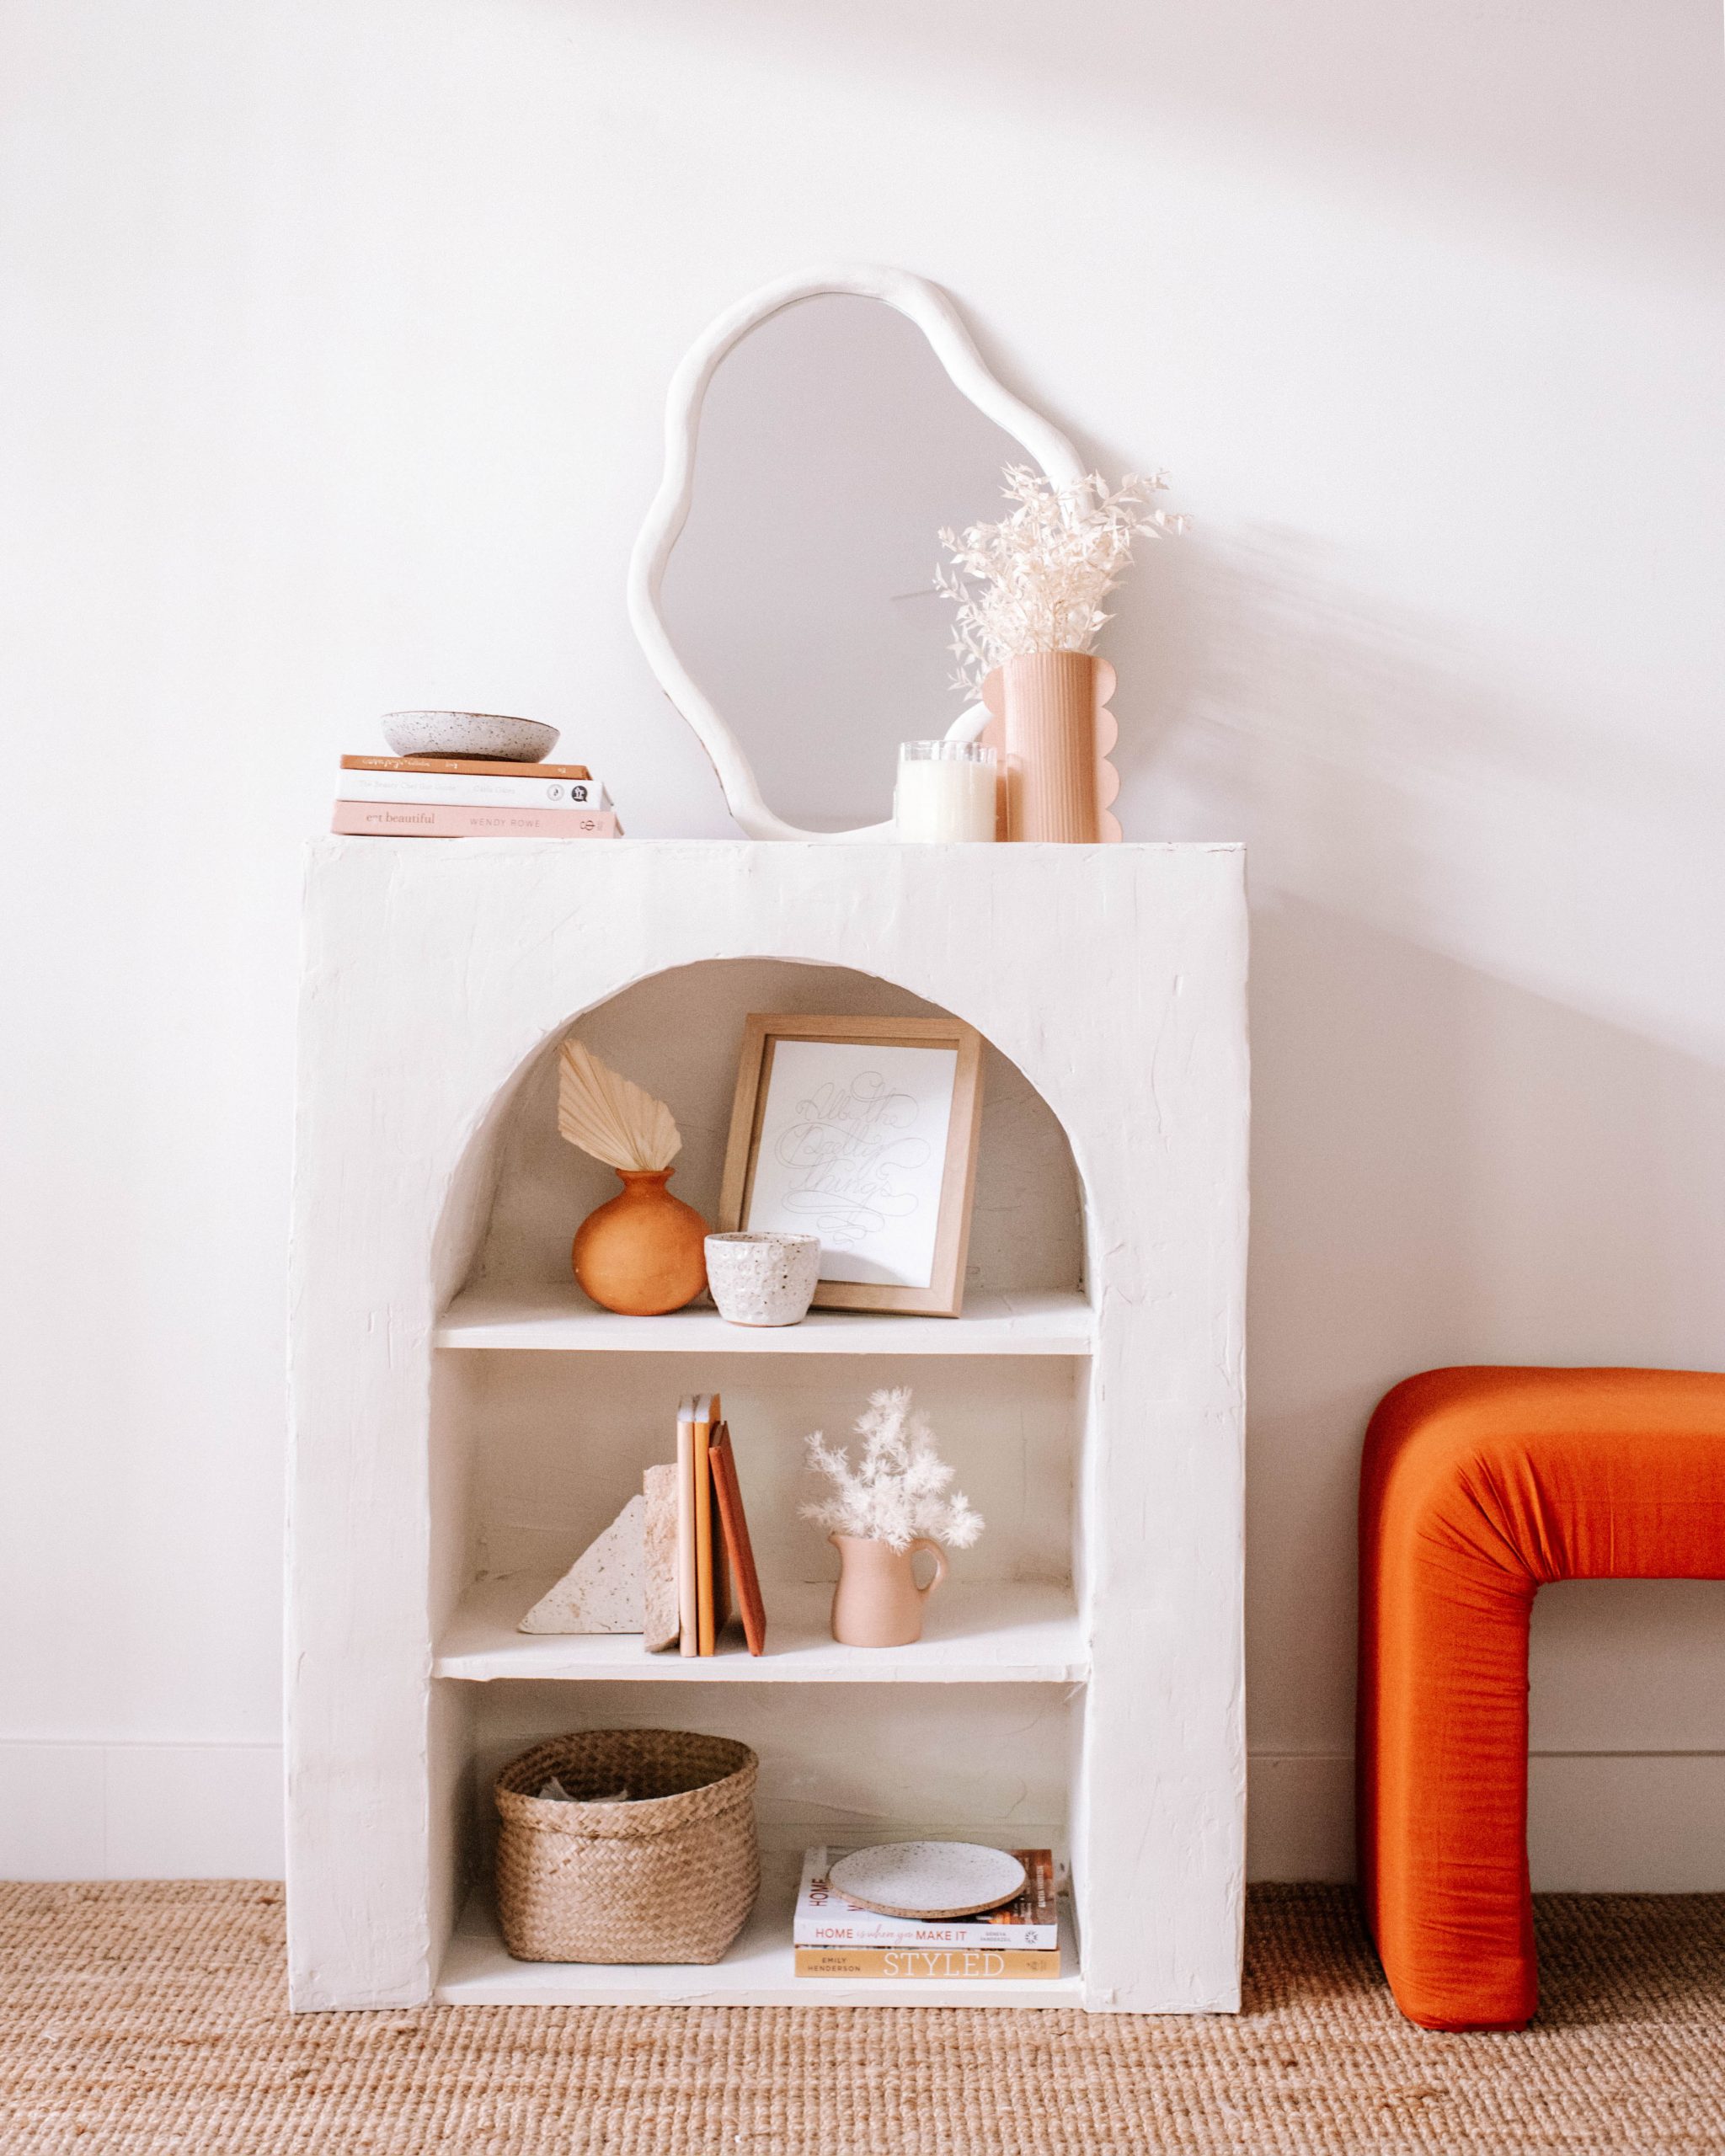 How to Make An Arched Shelf Mantle